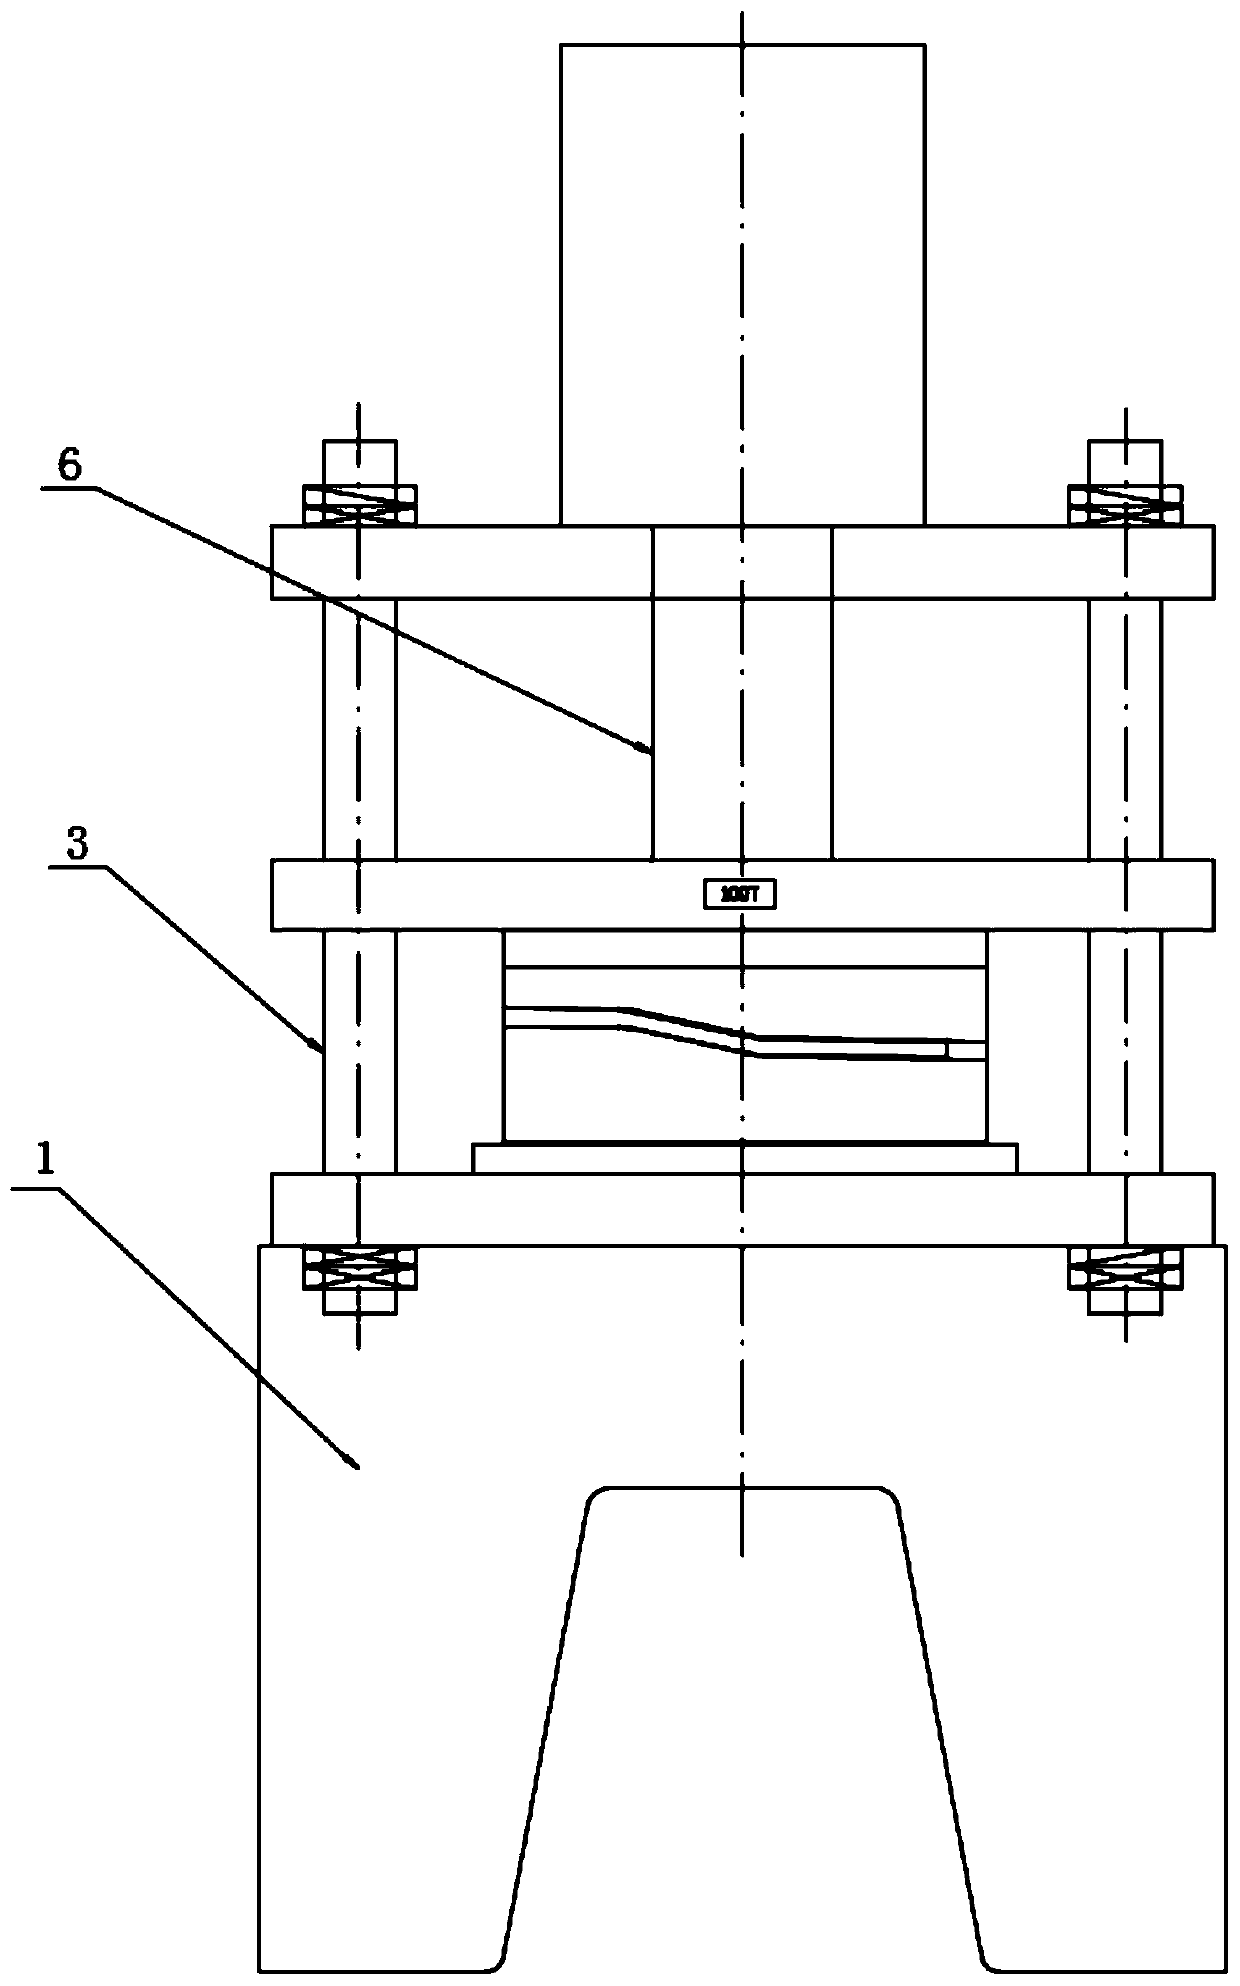 Extrusion forming equipment and process for square tube for rear fork